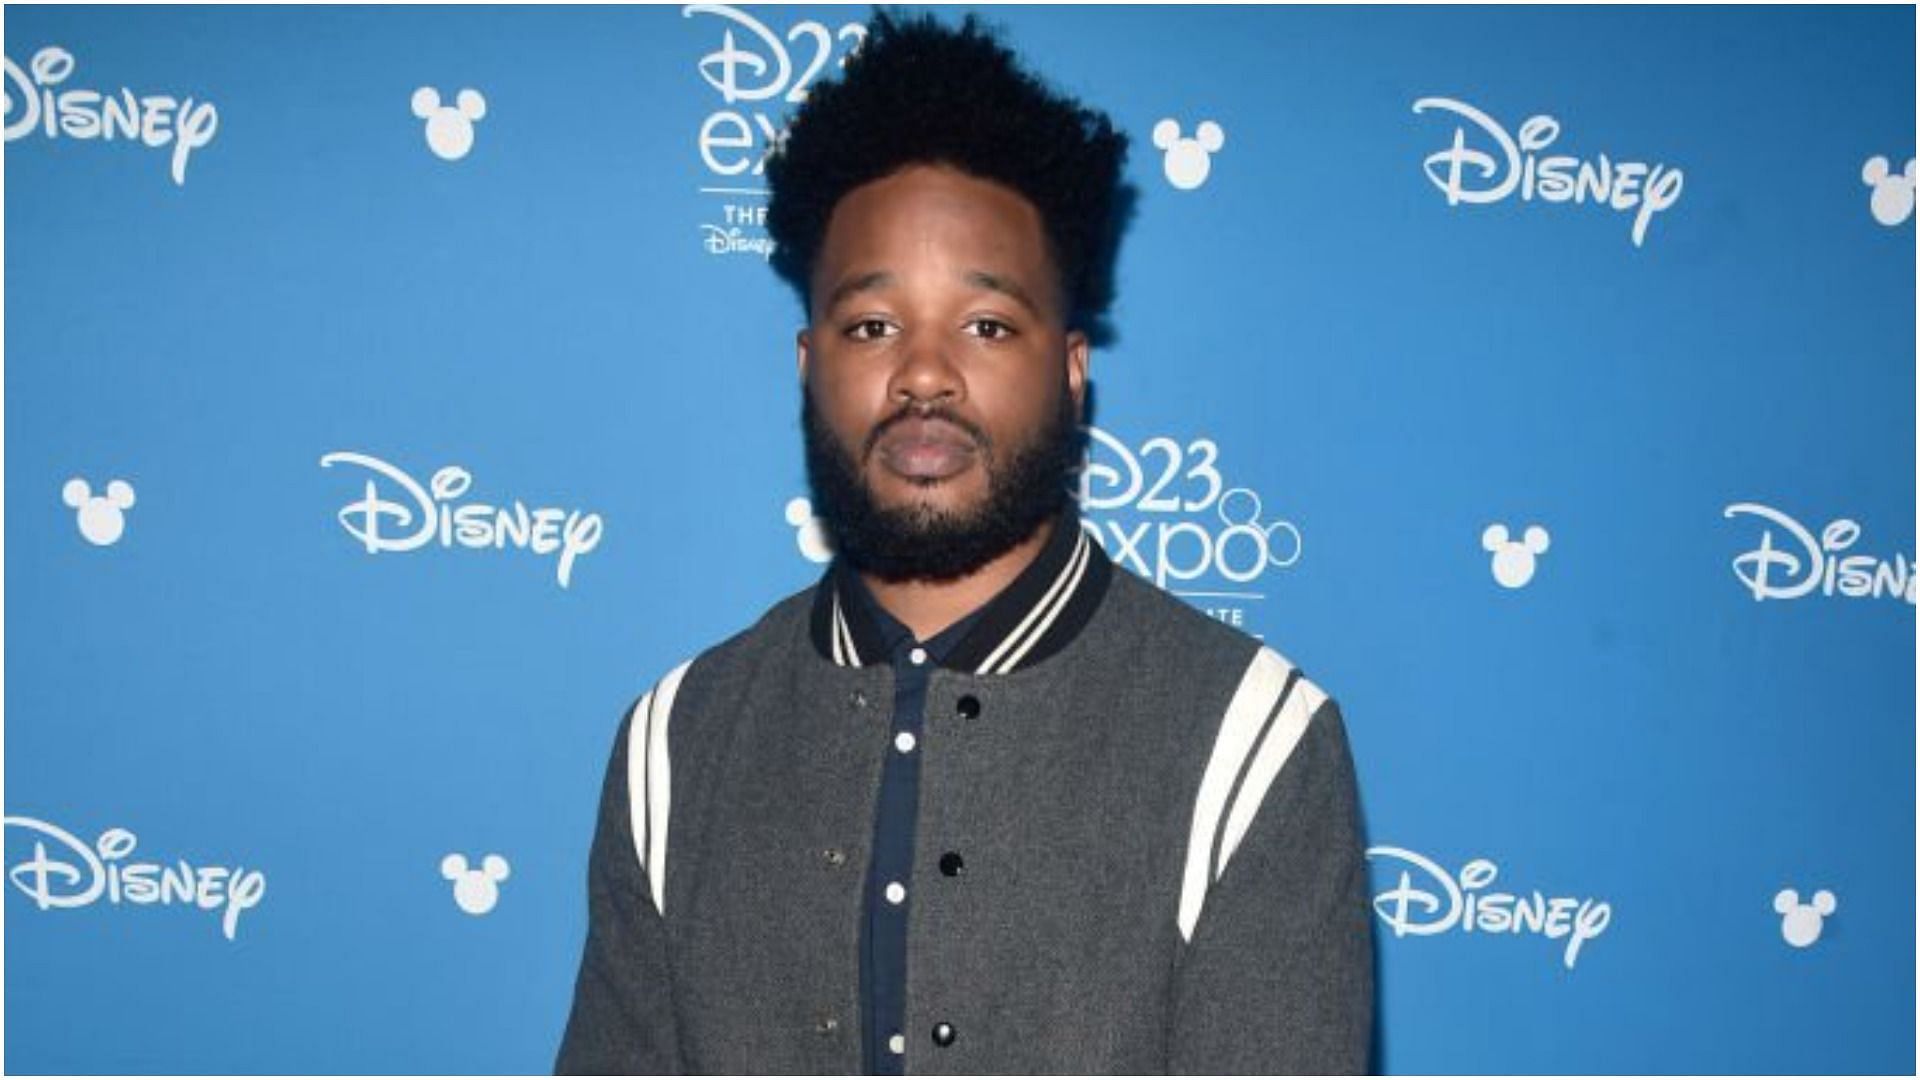 Ryan Coogler was detained in January 2022 after being mistaken for a bank robber (Image via Alberto E. Rodriguez/Getty Images)